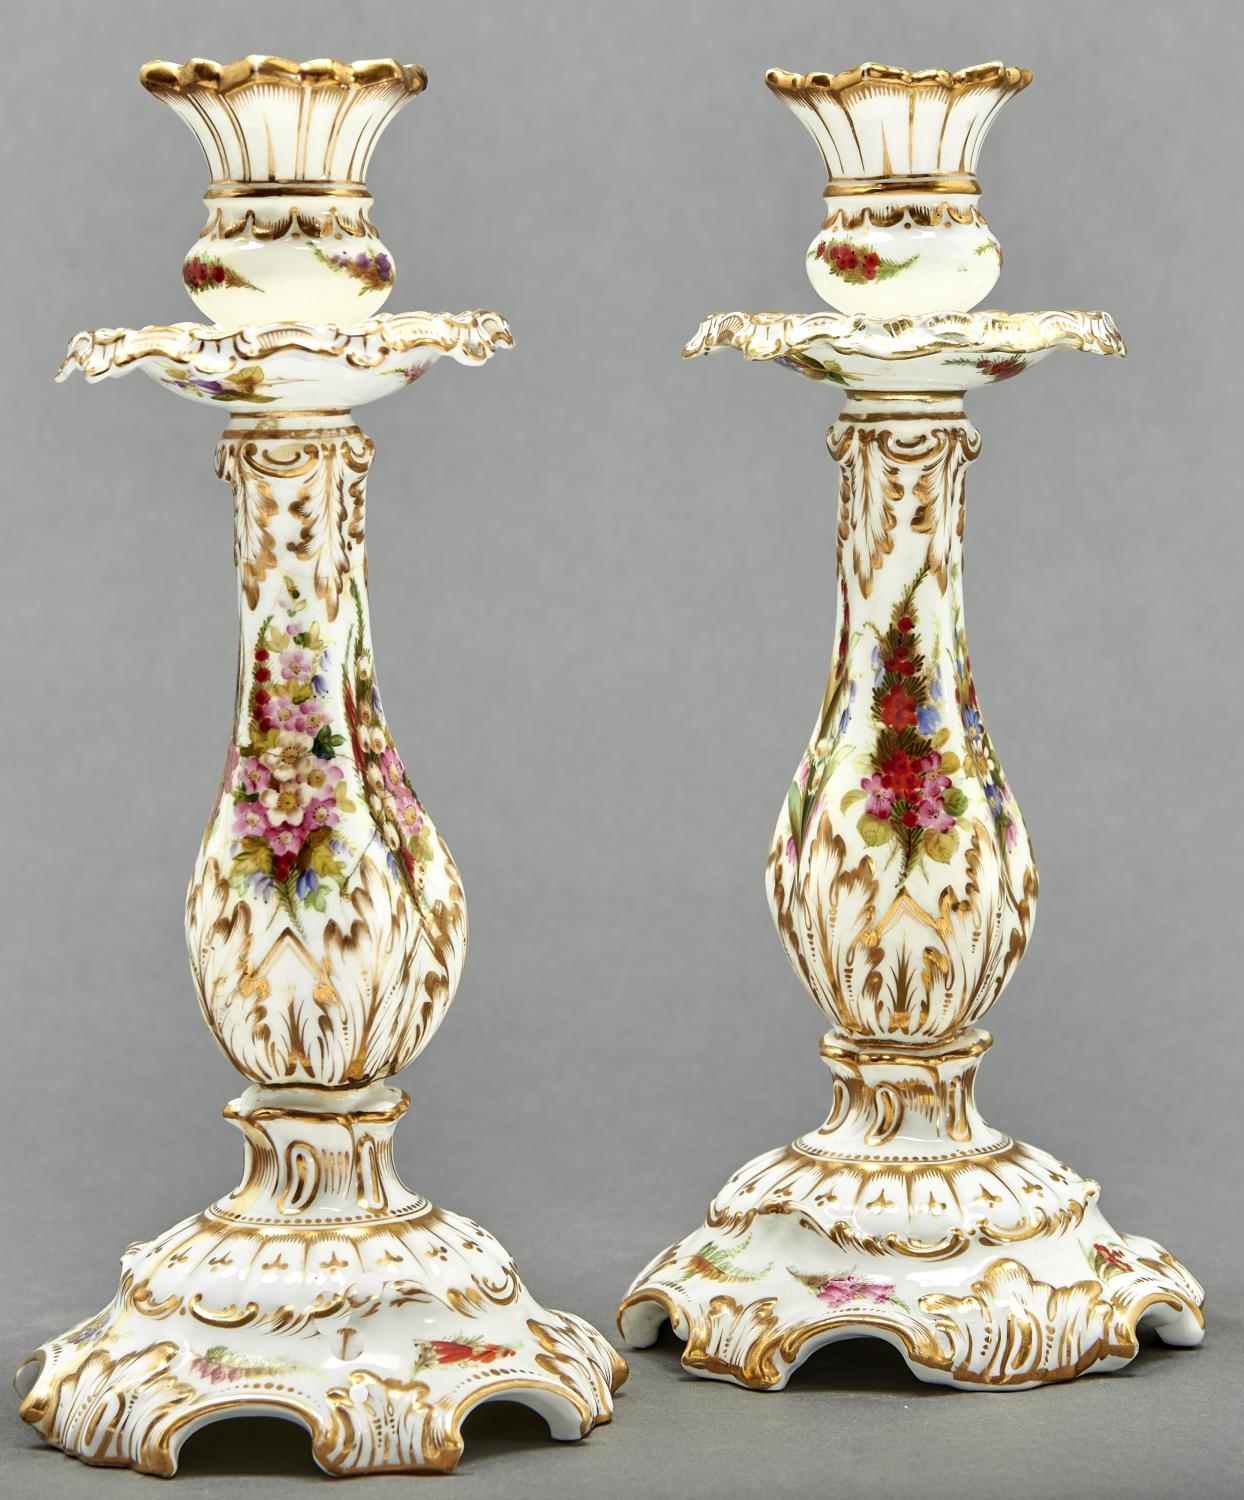 A rare pair of Coalport candlesticks, c1875, painted with flowers and gilt, 25.5cm h, printed